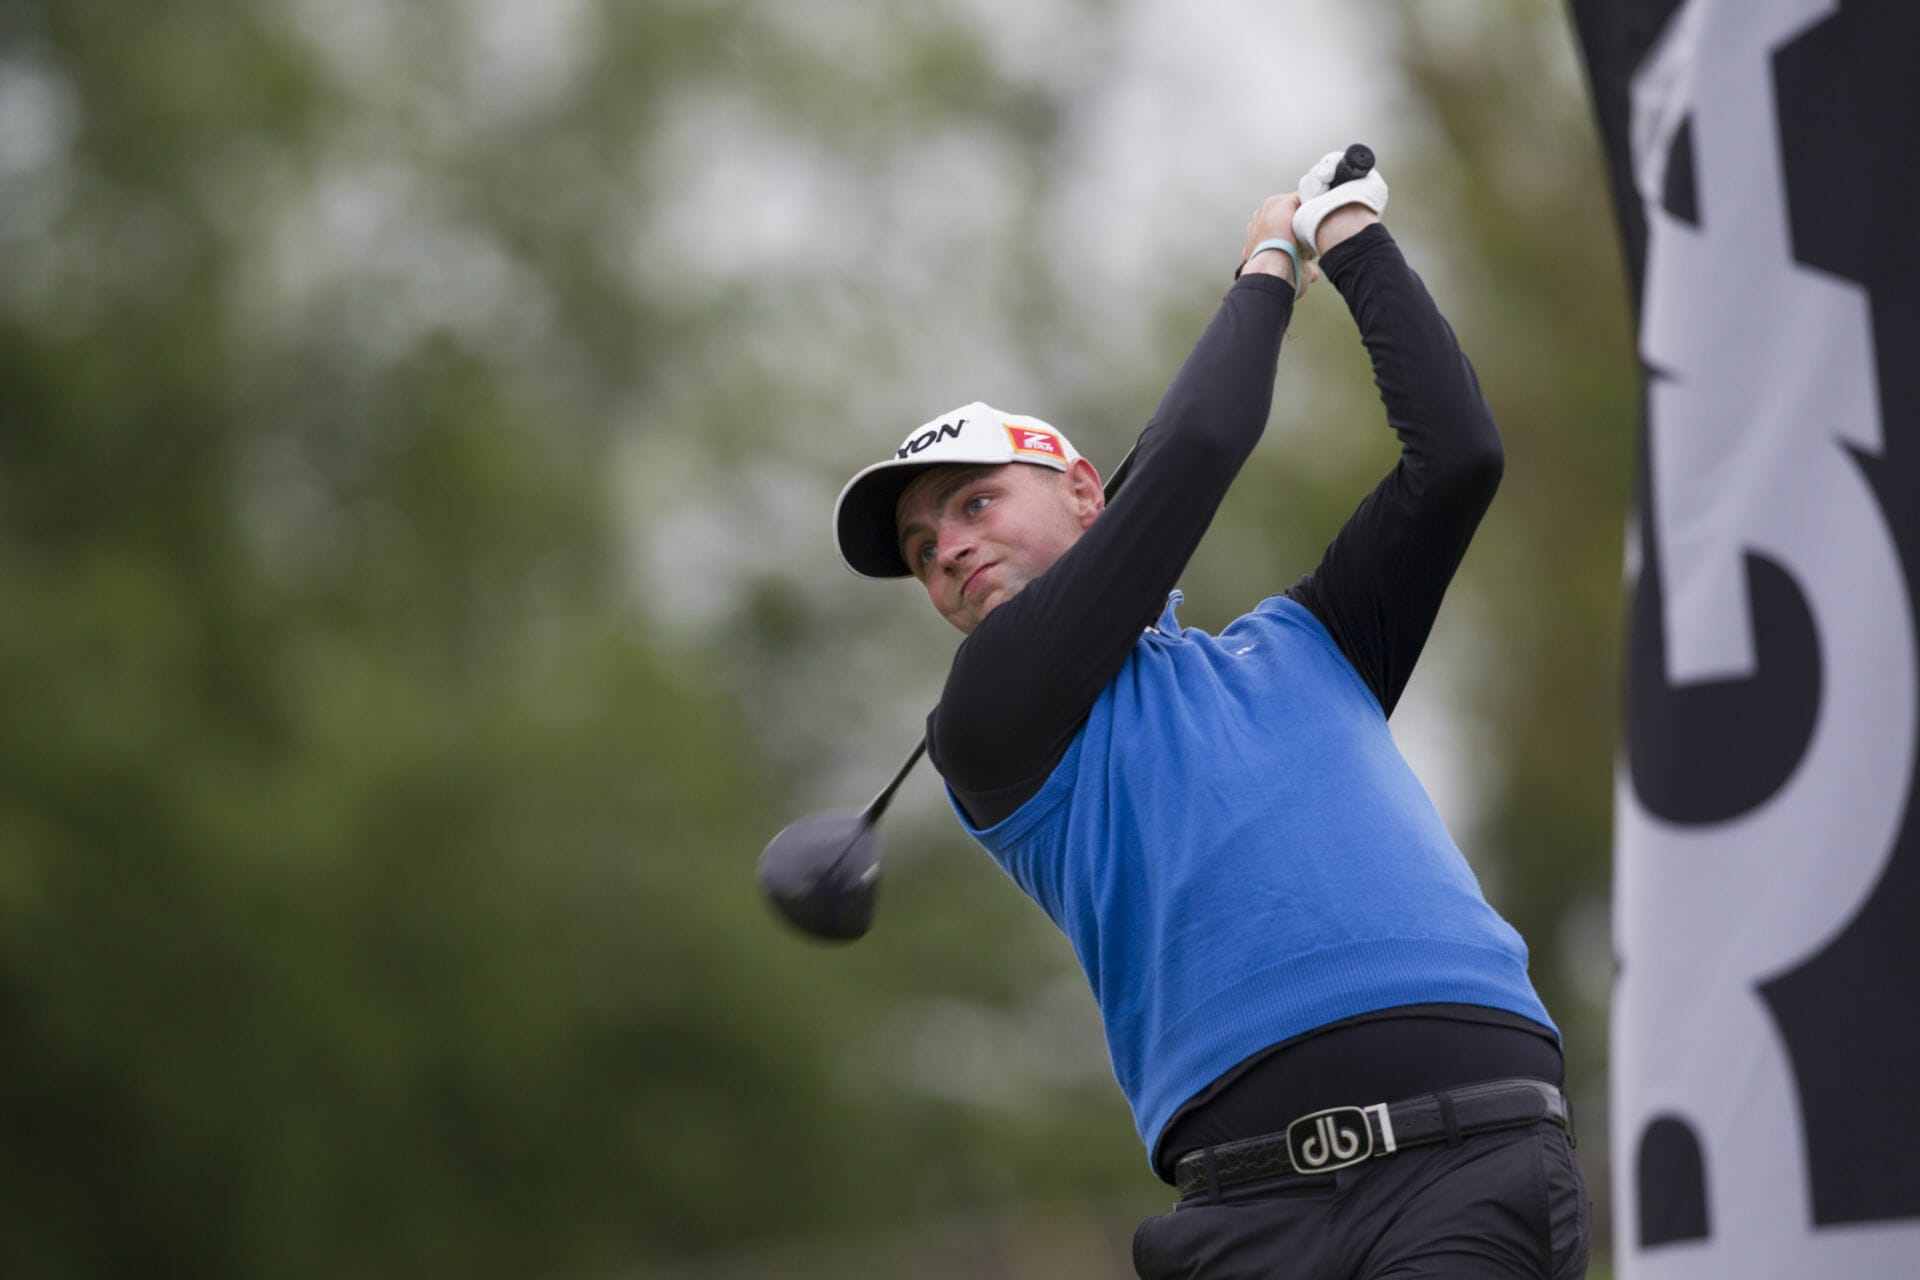 Record-breaking 63 from Joe Dillon as he claims Thurles Pro-Am in style